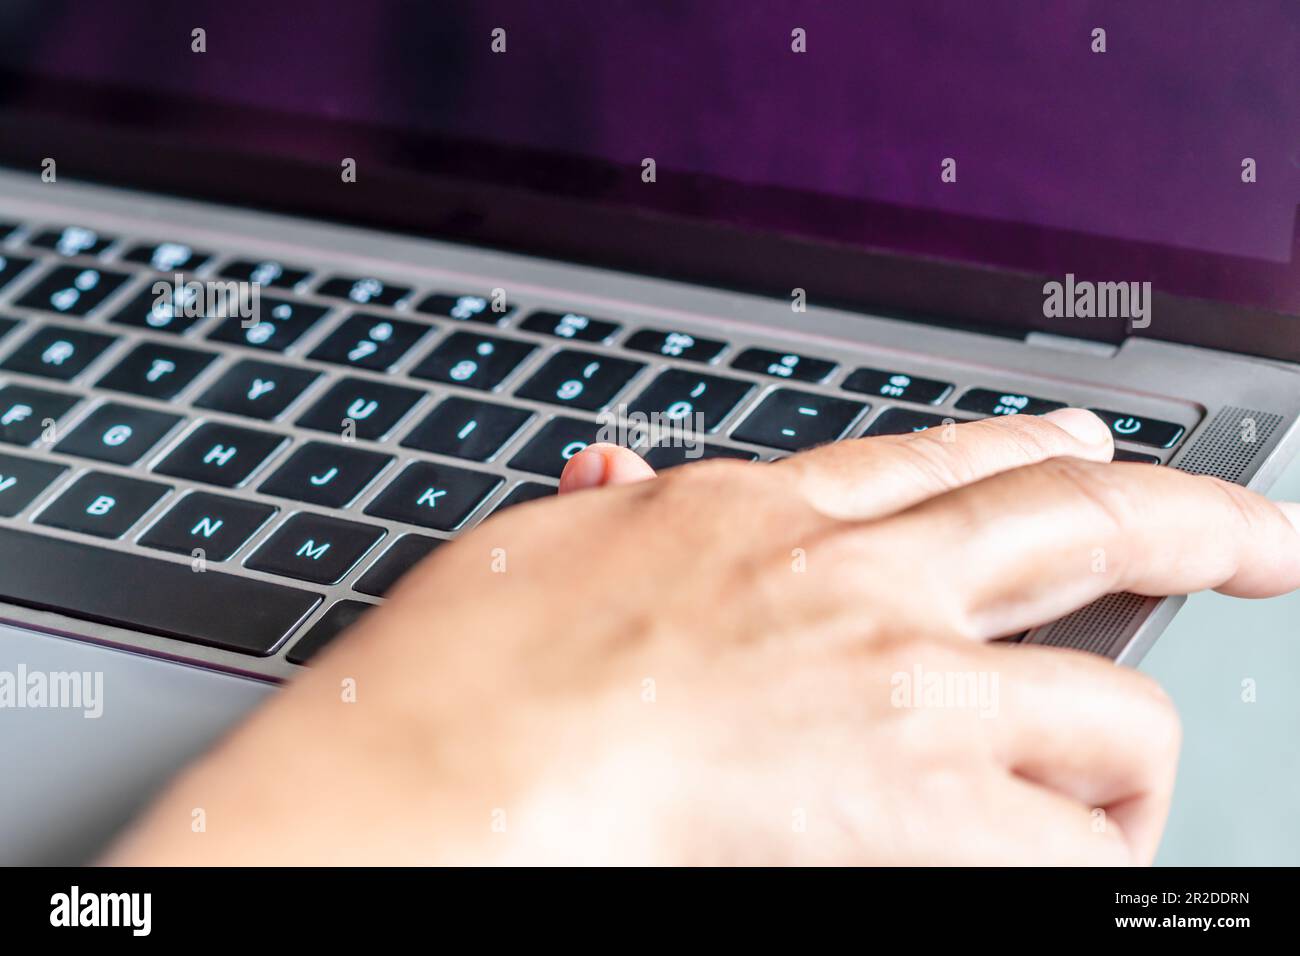 After clicking saving all business work use your finger to press the button to turn it off closed the gray laptop computer, placed it on a table, is t Stock Photo